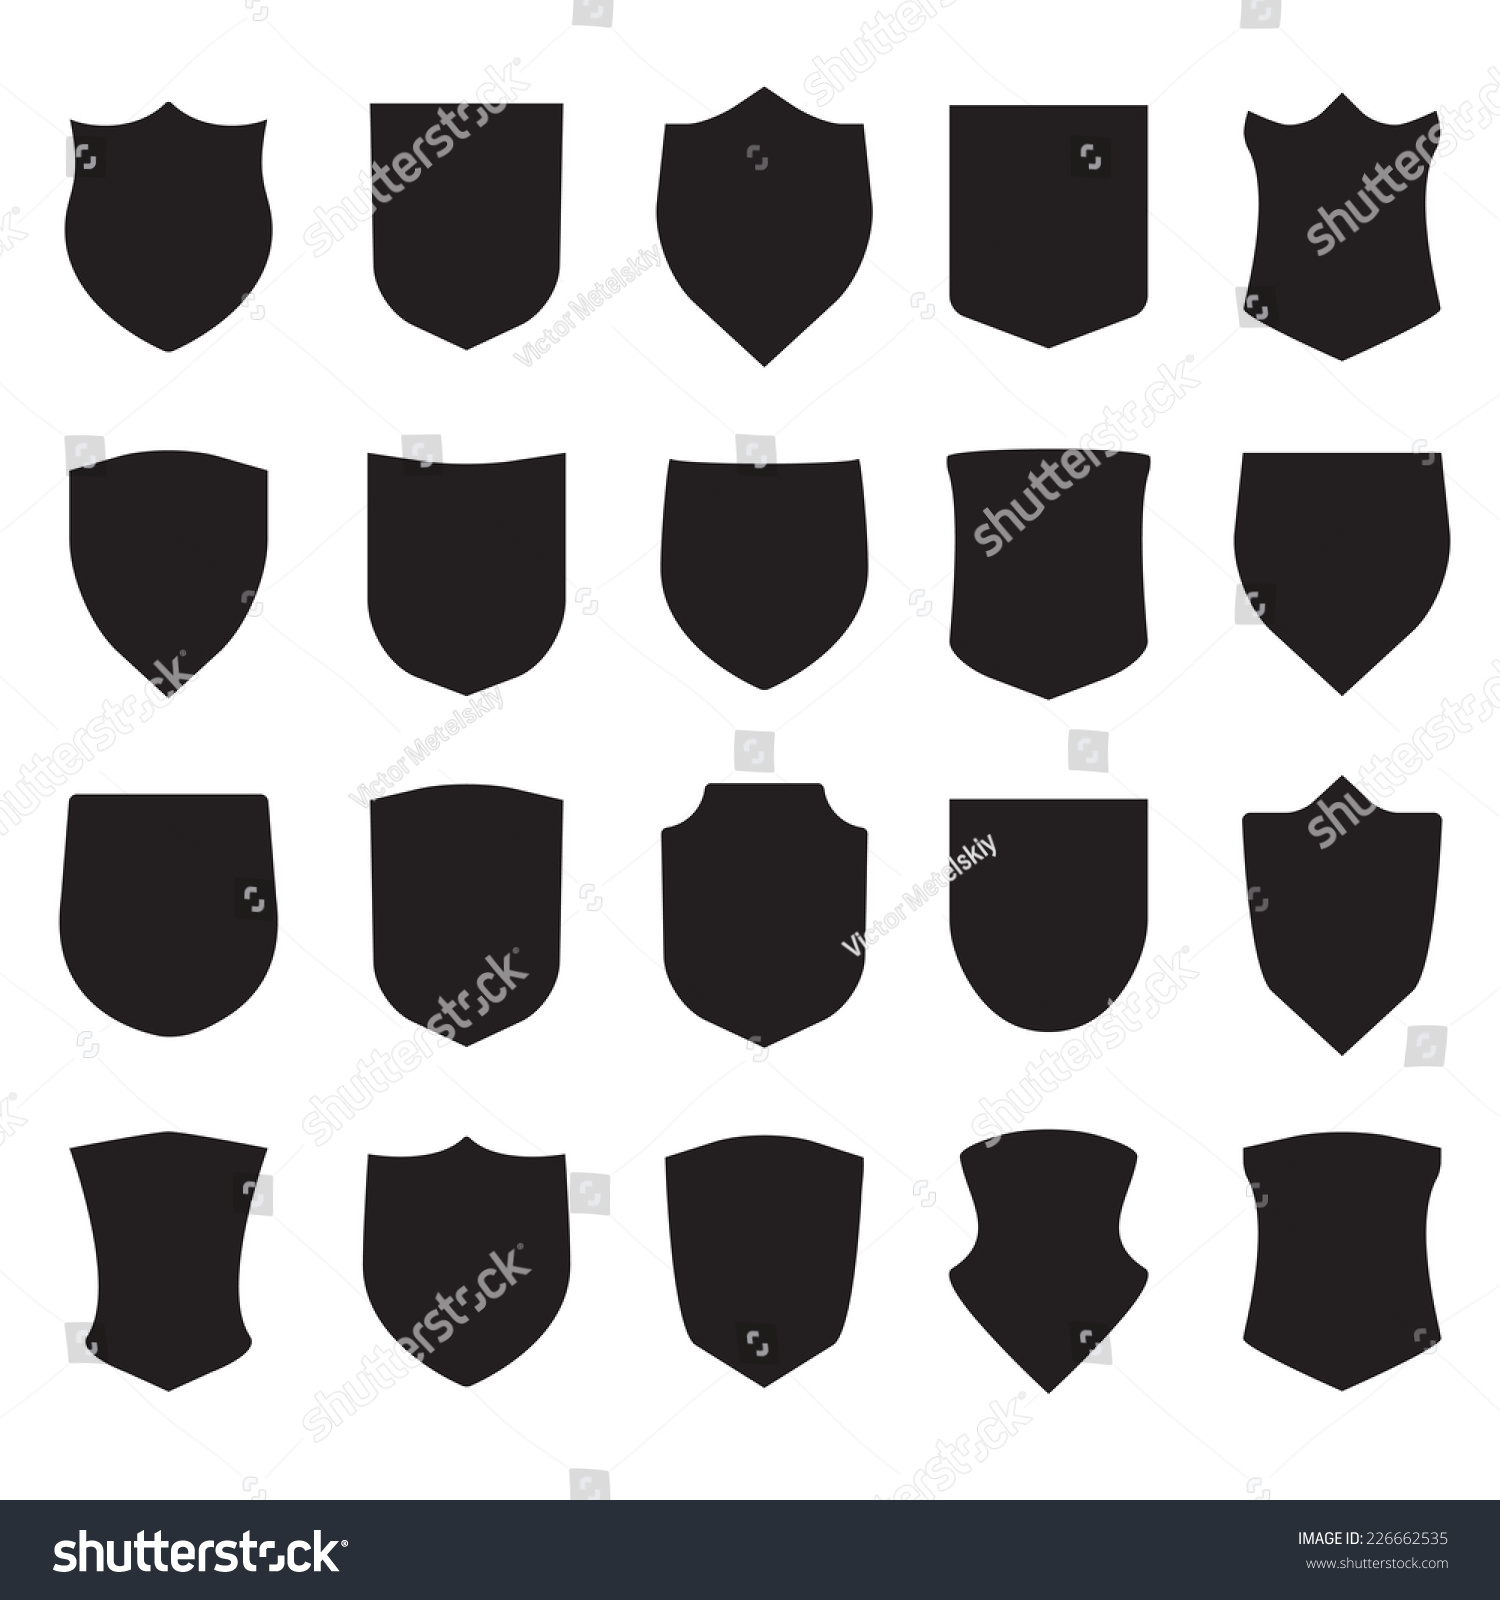 stock-vector-shield-icons-set-different-